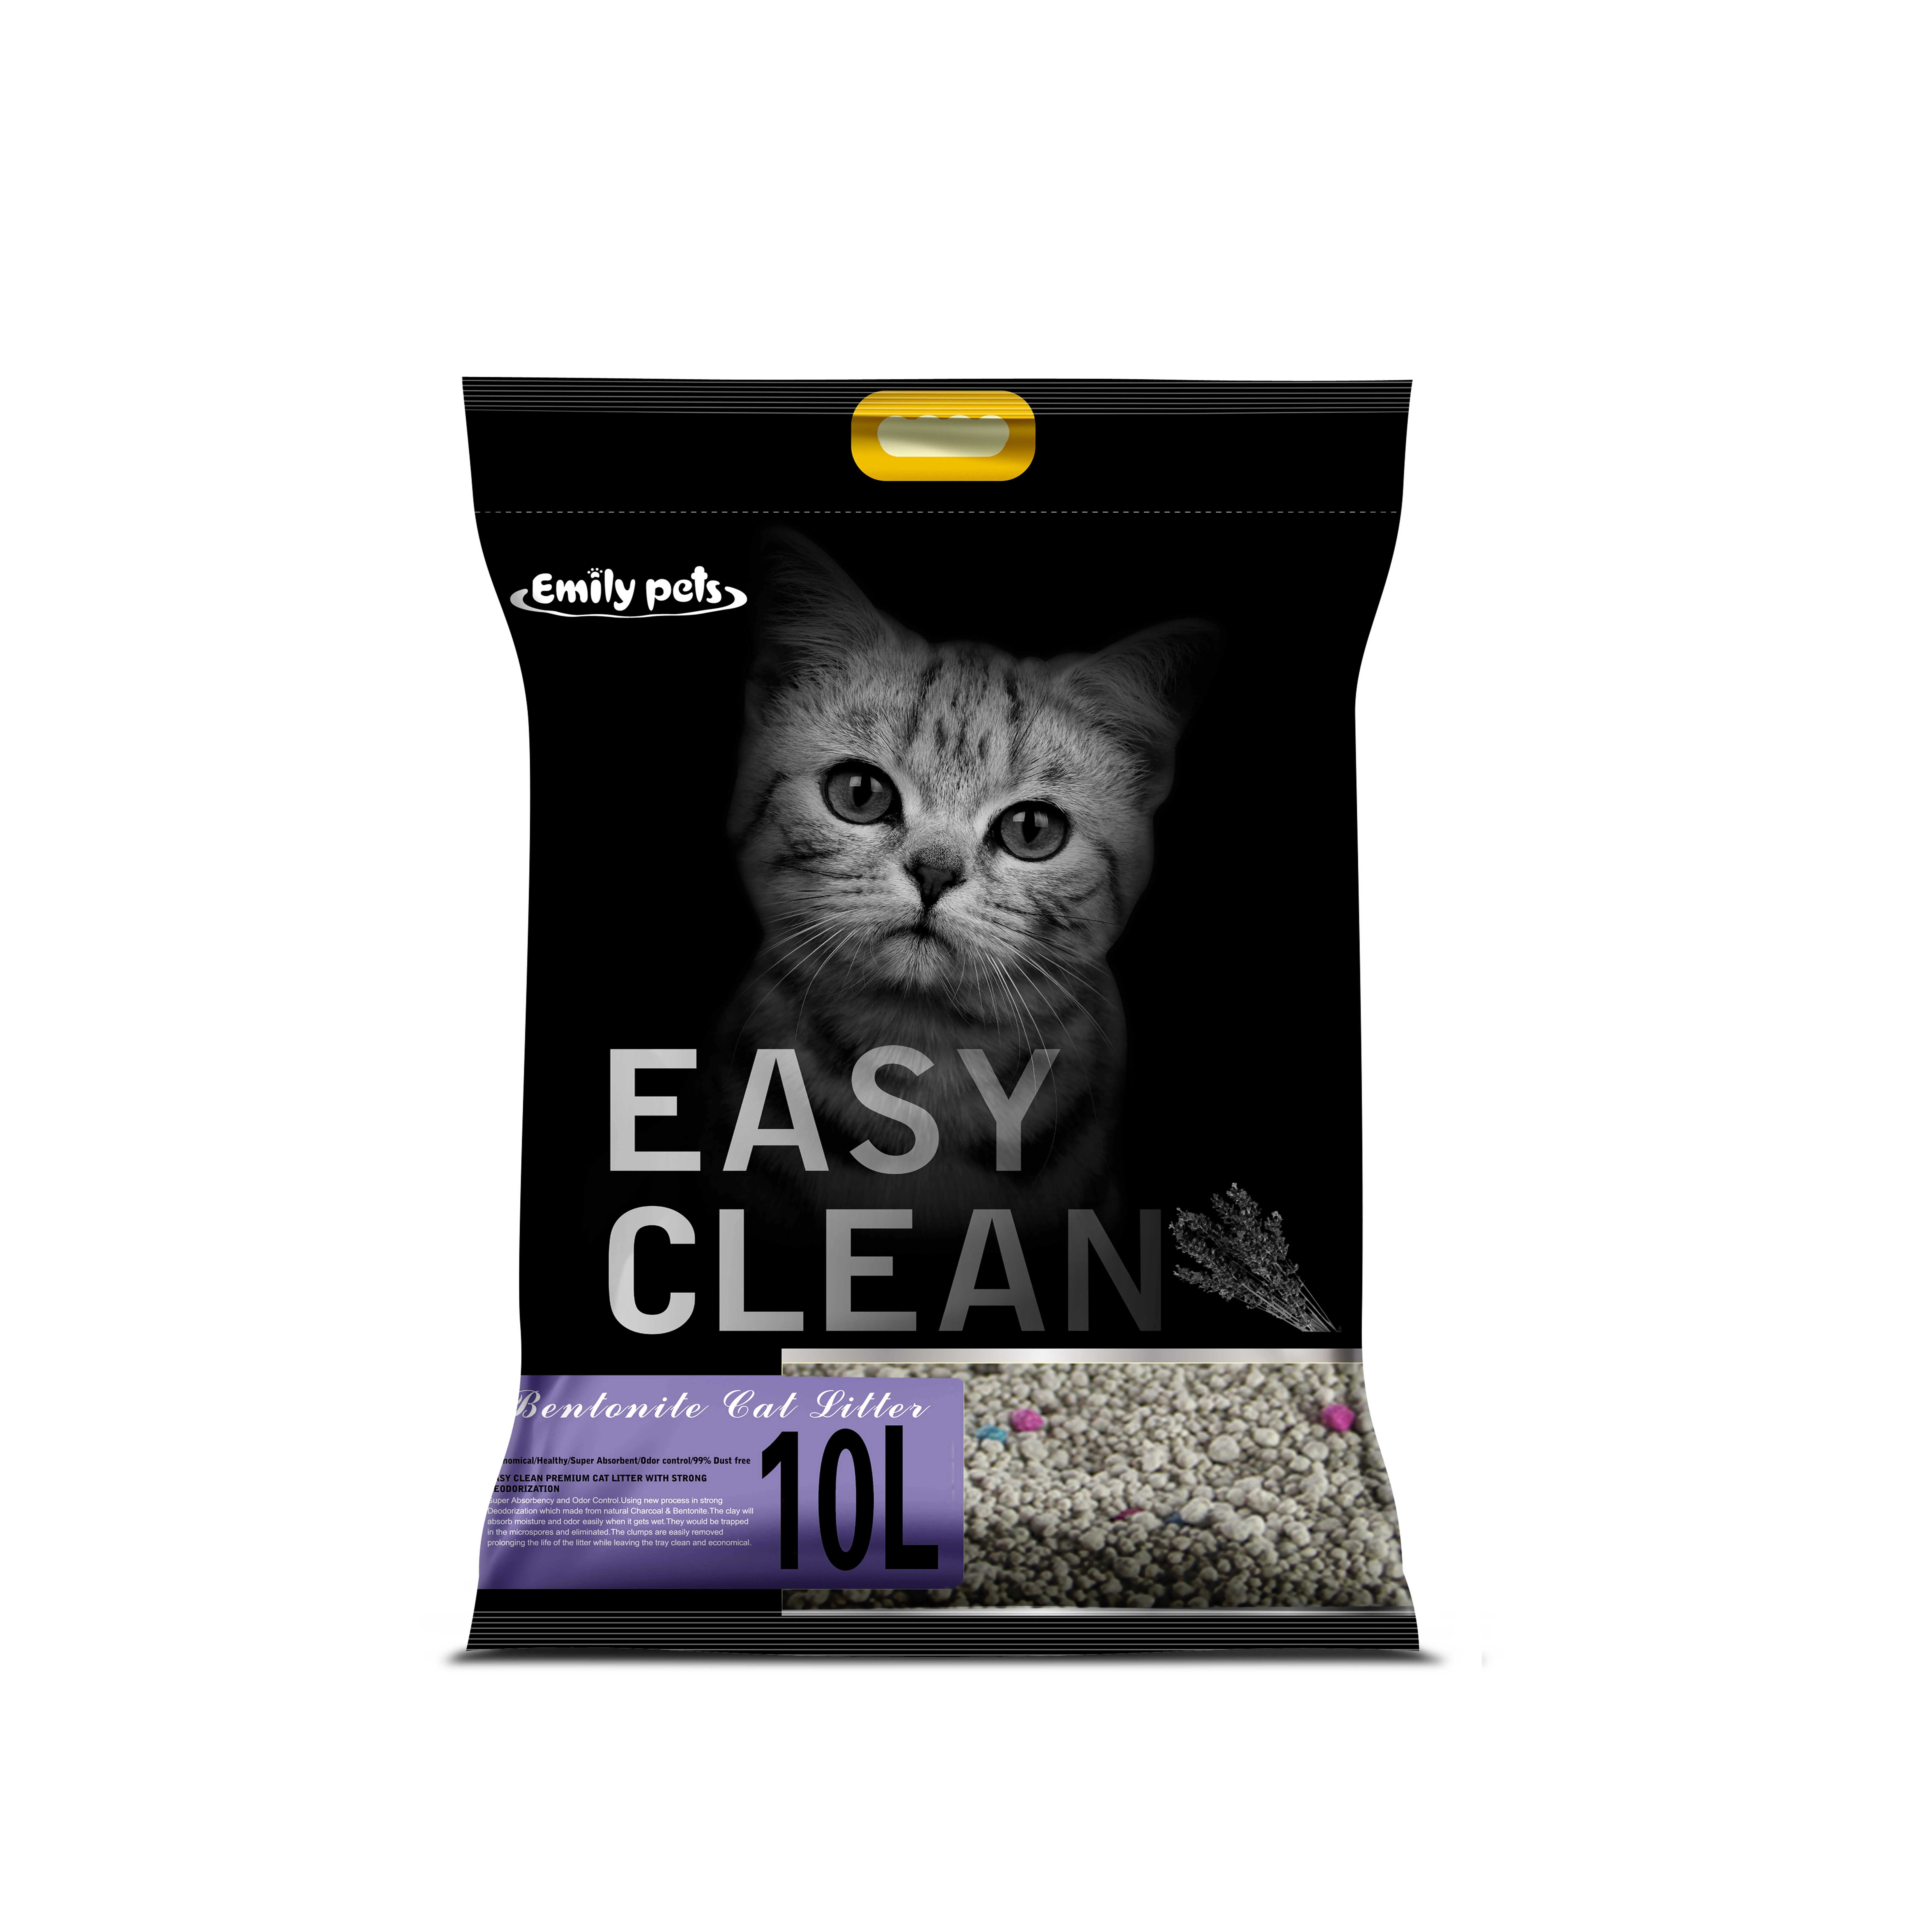 Emily pets FRESH SCENTED  Dust free mineral sand bentonite cat litter -10 Litre